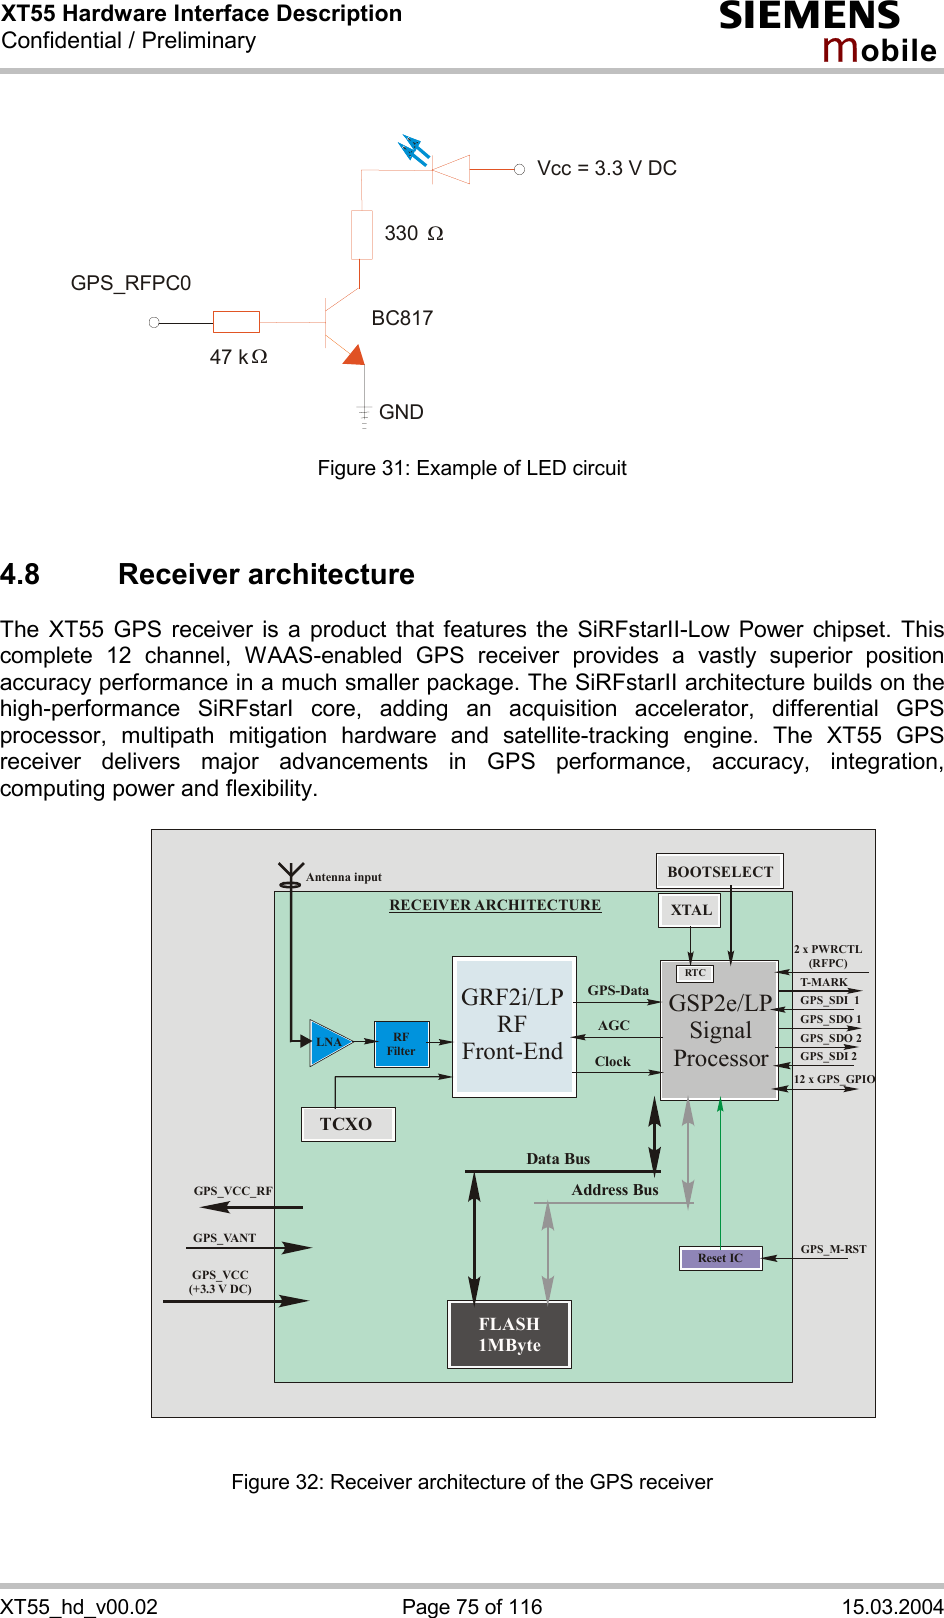 XT55 Hardware Interface Description Confidential / Preliminary s mo b i l e XT55_hd_v00.02  Page 75 of 116  15.03.2004              Figure 31: Example of LED circuit   4.8 Receiver architecture The XT55 GPS receiver is a product that features the SiRFstarII-Low Power chipset. This complete 12 channel, WAAS-enabled GPS receiver provides a vastly superior position accuracy performance in a much smaller package. The SiRFstarII architecture builds on the high-performance SiRFstarI core, adding an acquisition accelerator, differential GPS processor, multipath mitigation hardware and satellite-tracking engine. The XT55 GPS receiver delivers major advancements in GPS performance, accuracy, integration, computing power and flexibility.   Antenna input LNA RF FilterGRF2i/LPRFFront-EndGSP2e/LPSignalProcessorXTALData BusAddress BusGPS-DataAGCClockReset ICFLASH1MByteTCXOGPS_VCC (+3.3 V DC)2 x PWRCTL(RFPC)T- MA RKGPS_SDI  1GPS_SDO 1GPS_SDO 2GPS_SDI 212 x GPS_GPIOGPS_M-RSTBOOTSELECTGPS_VANTGPS_VCC_RFRECEIVER ARCHITECTURERTC Figure 32: Receiver architecture of the GPS receiver      GPS_RFPC0 330  WVcc = 3.3 V DCBC81747 k W GND